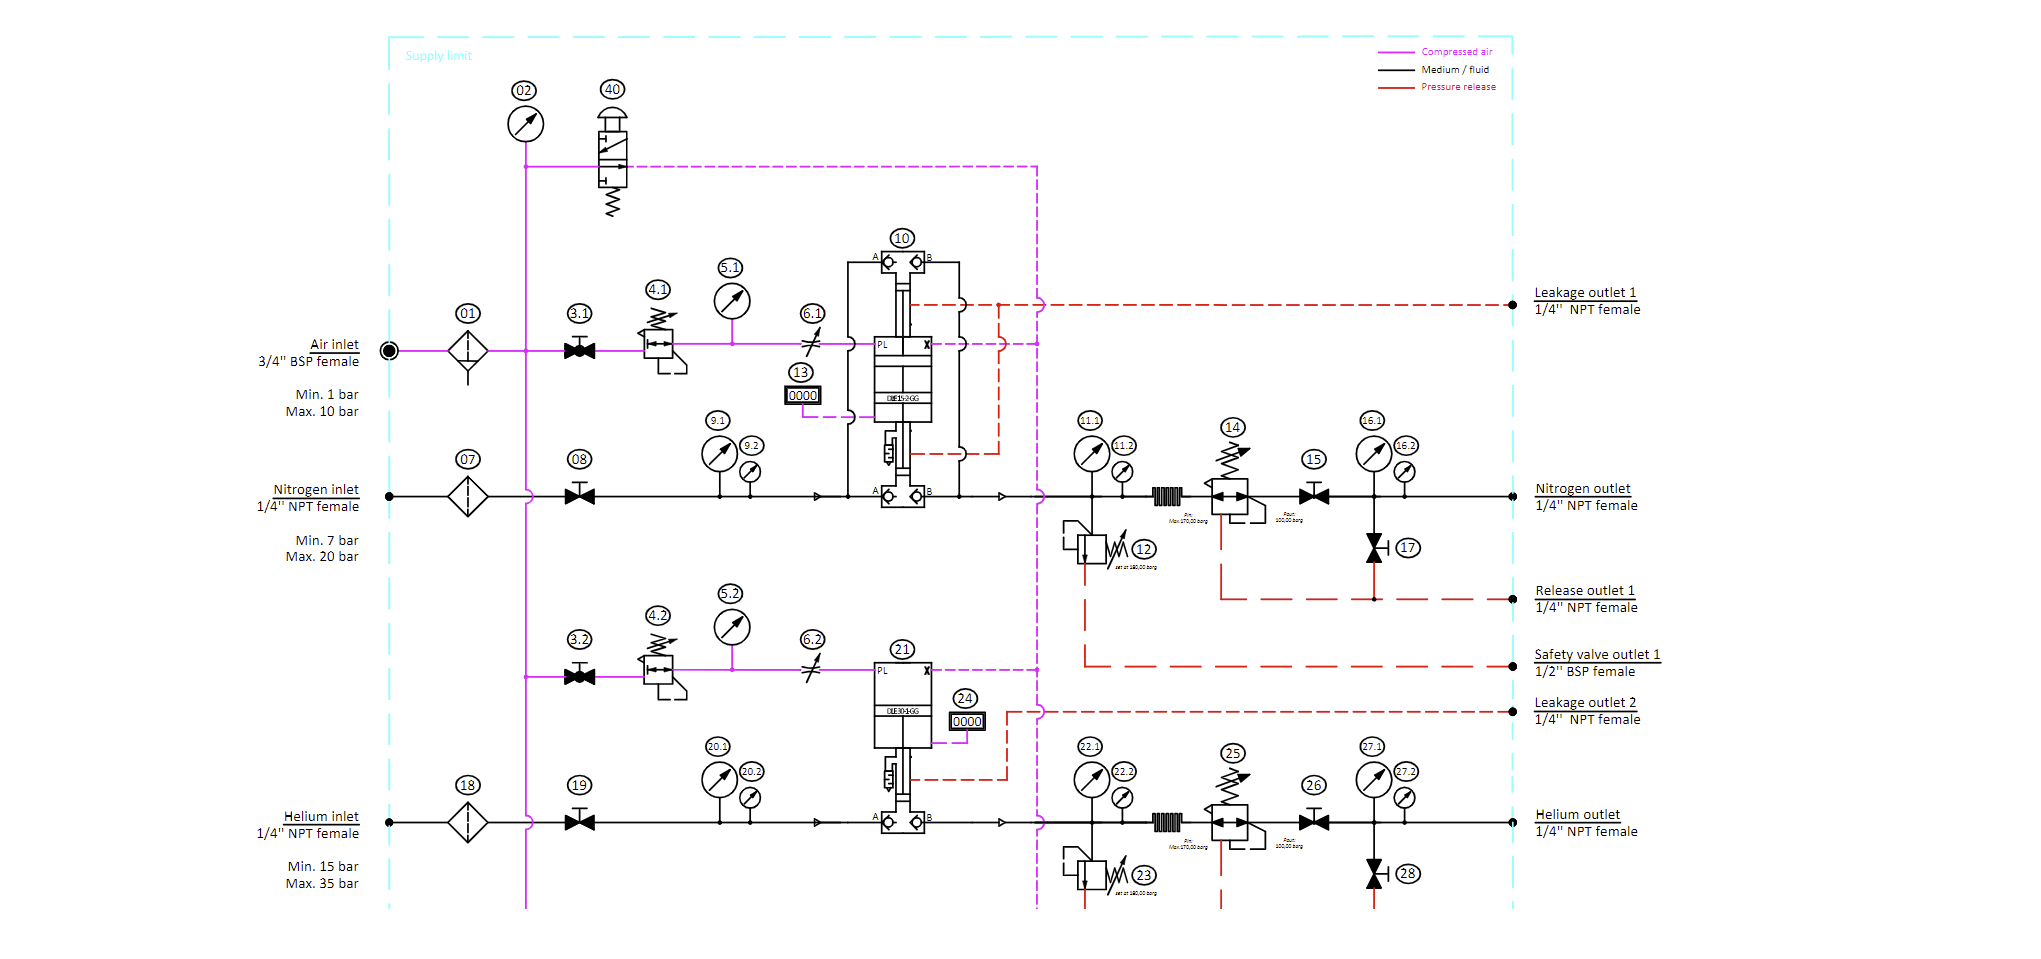 Enlarged view: Scheme showing a Piping and Instrumentation Diagram (P&ID) of an imaginary equipment to illustrate the skills of SwissCAT+ team to support customers in designing high-throughput and automated tools or labs.